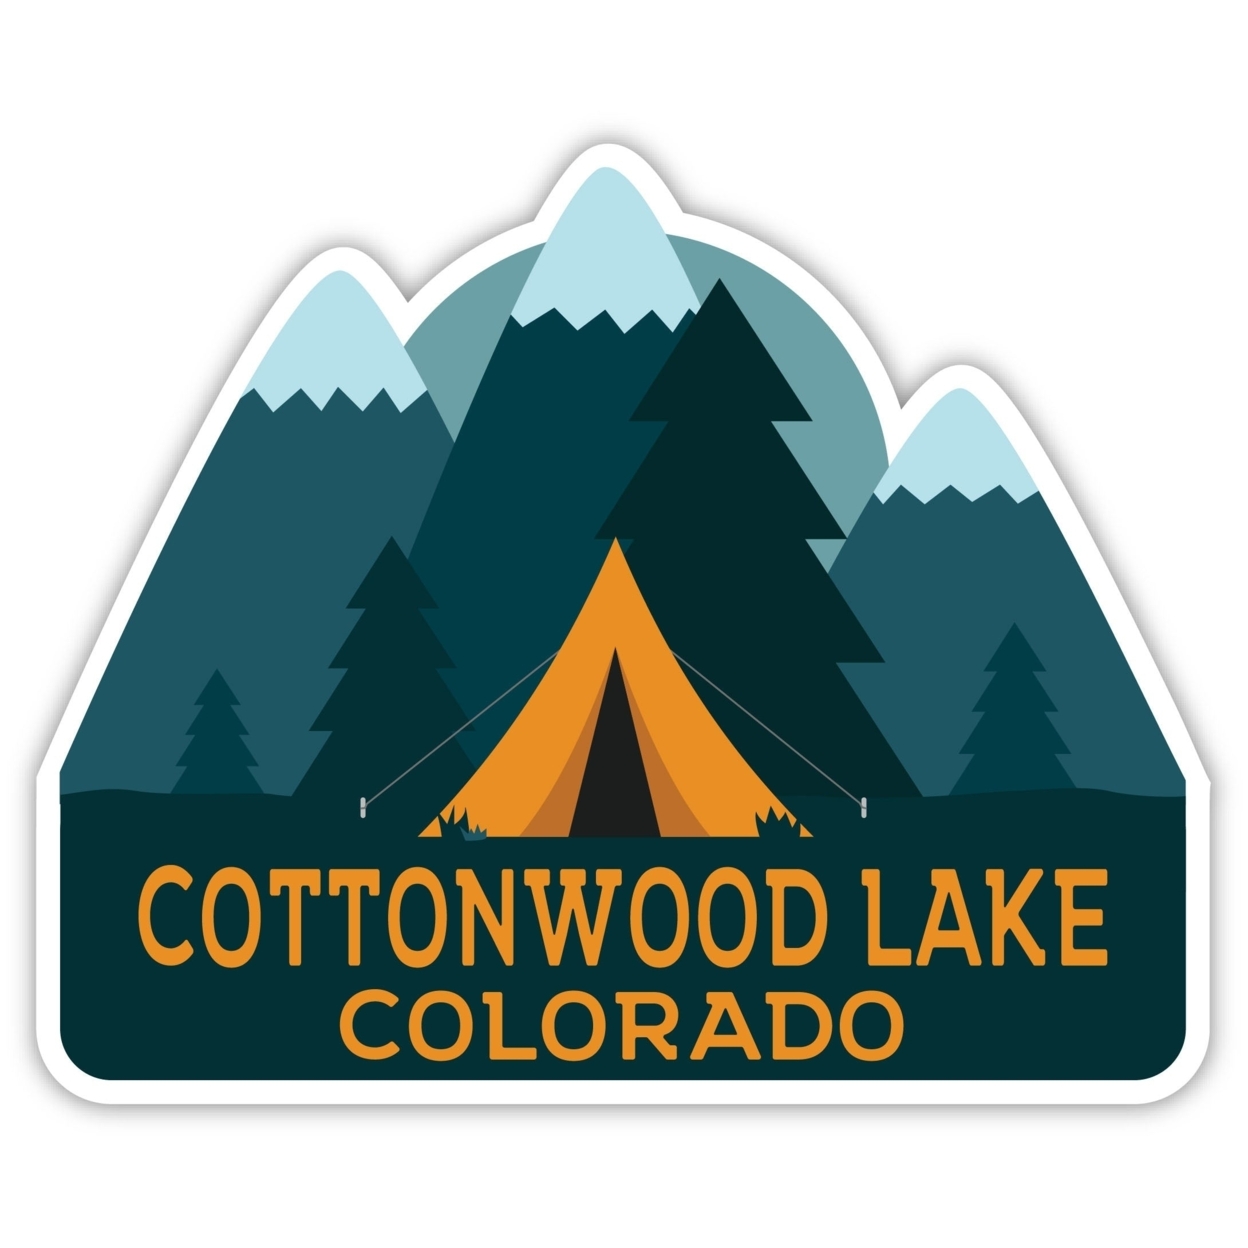 Cottonwood Lake Colorado Souvenir Decorative Stickers (Choose Theme And Size) - 4-Pack, 2-Inch, Great Outdoors